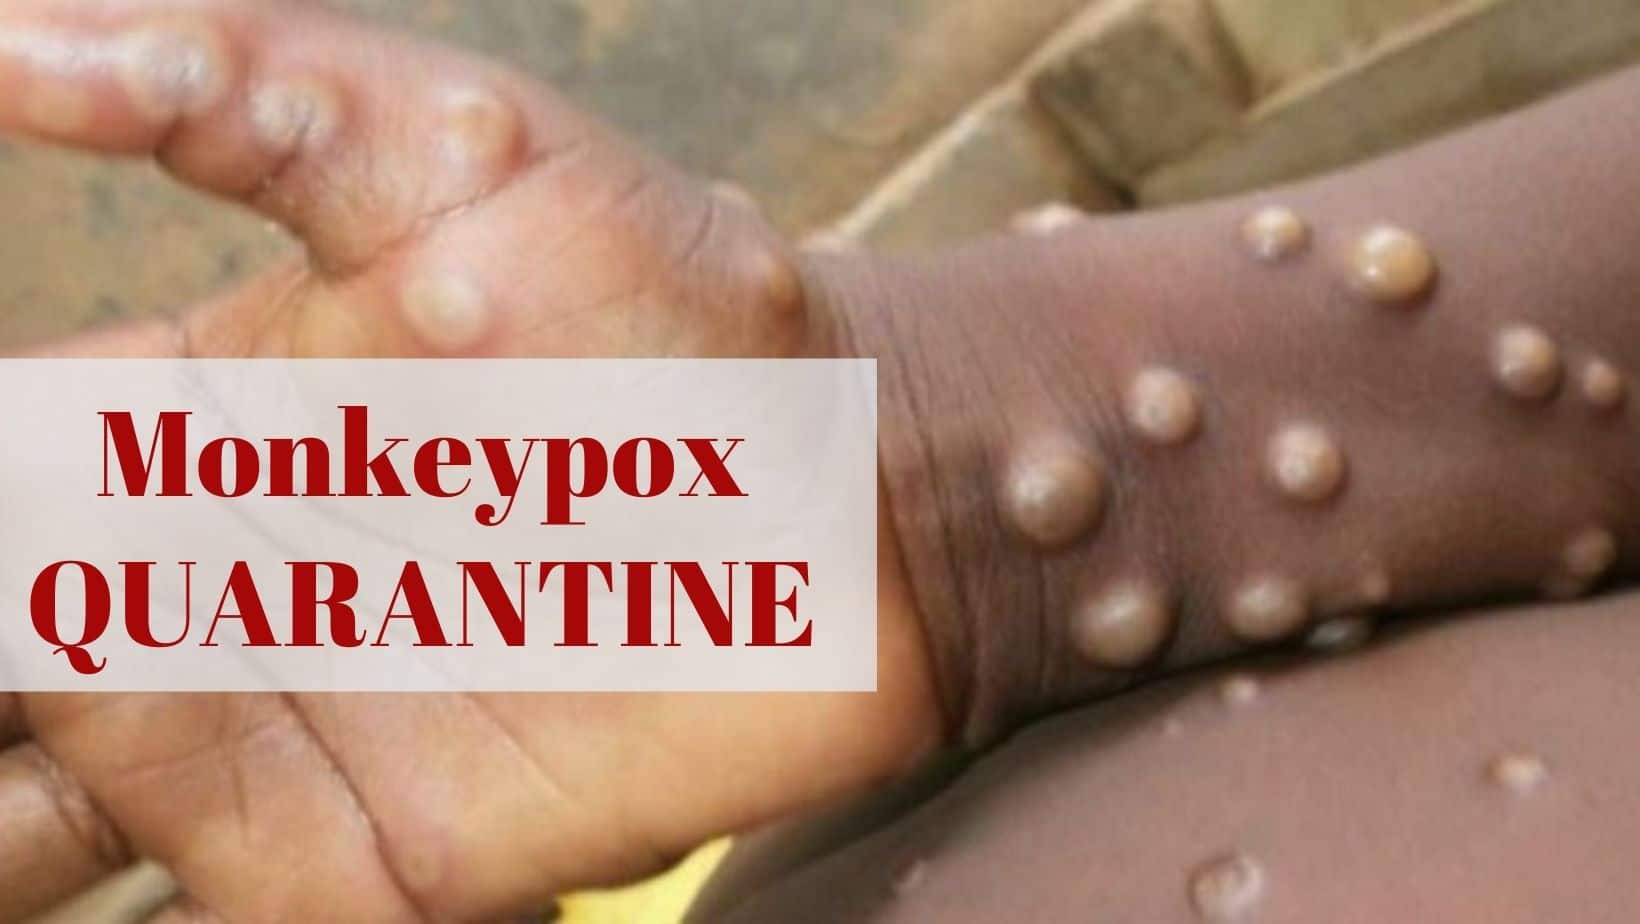 Belgium Becomes First Country To Introduce Monkeypox Quarantine As Virus Spread To 12 Countries